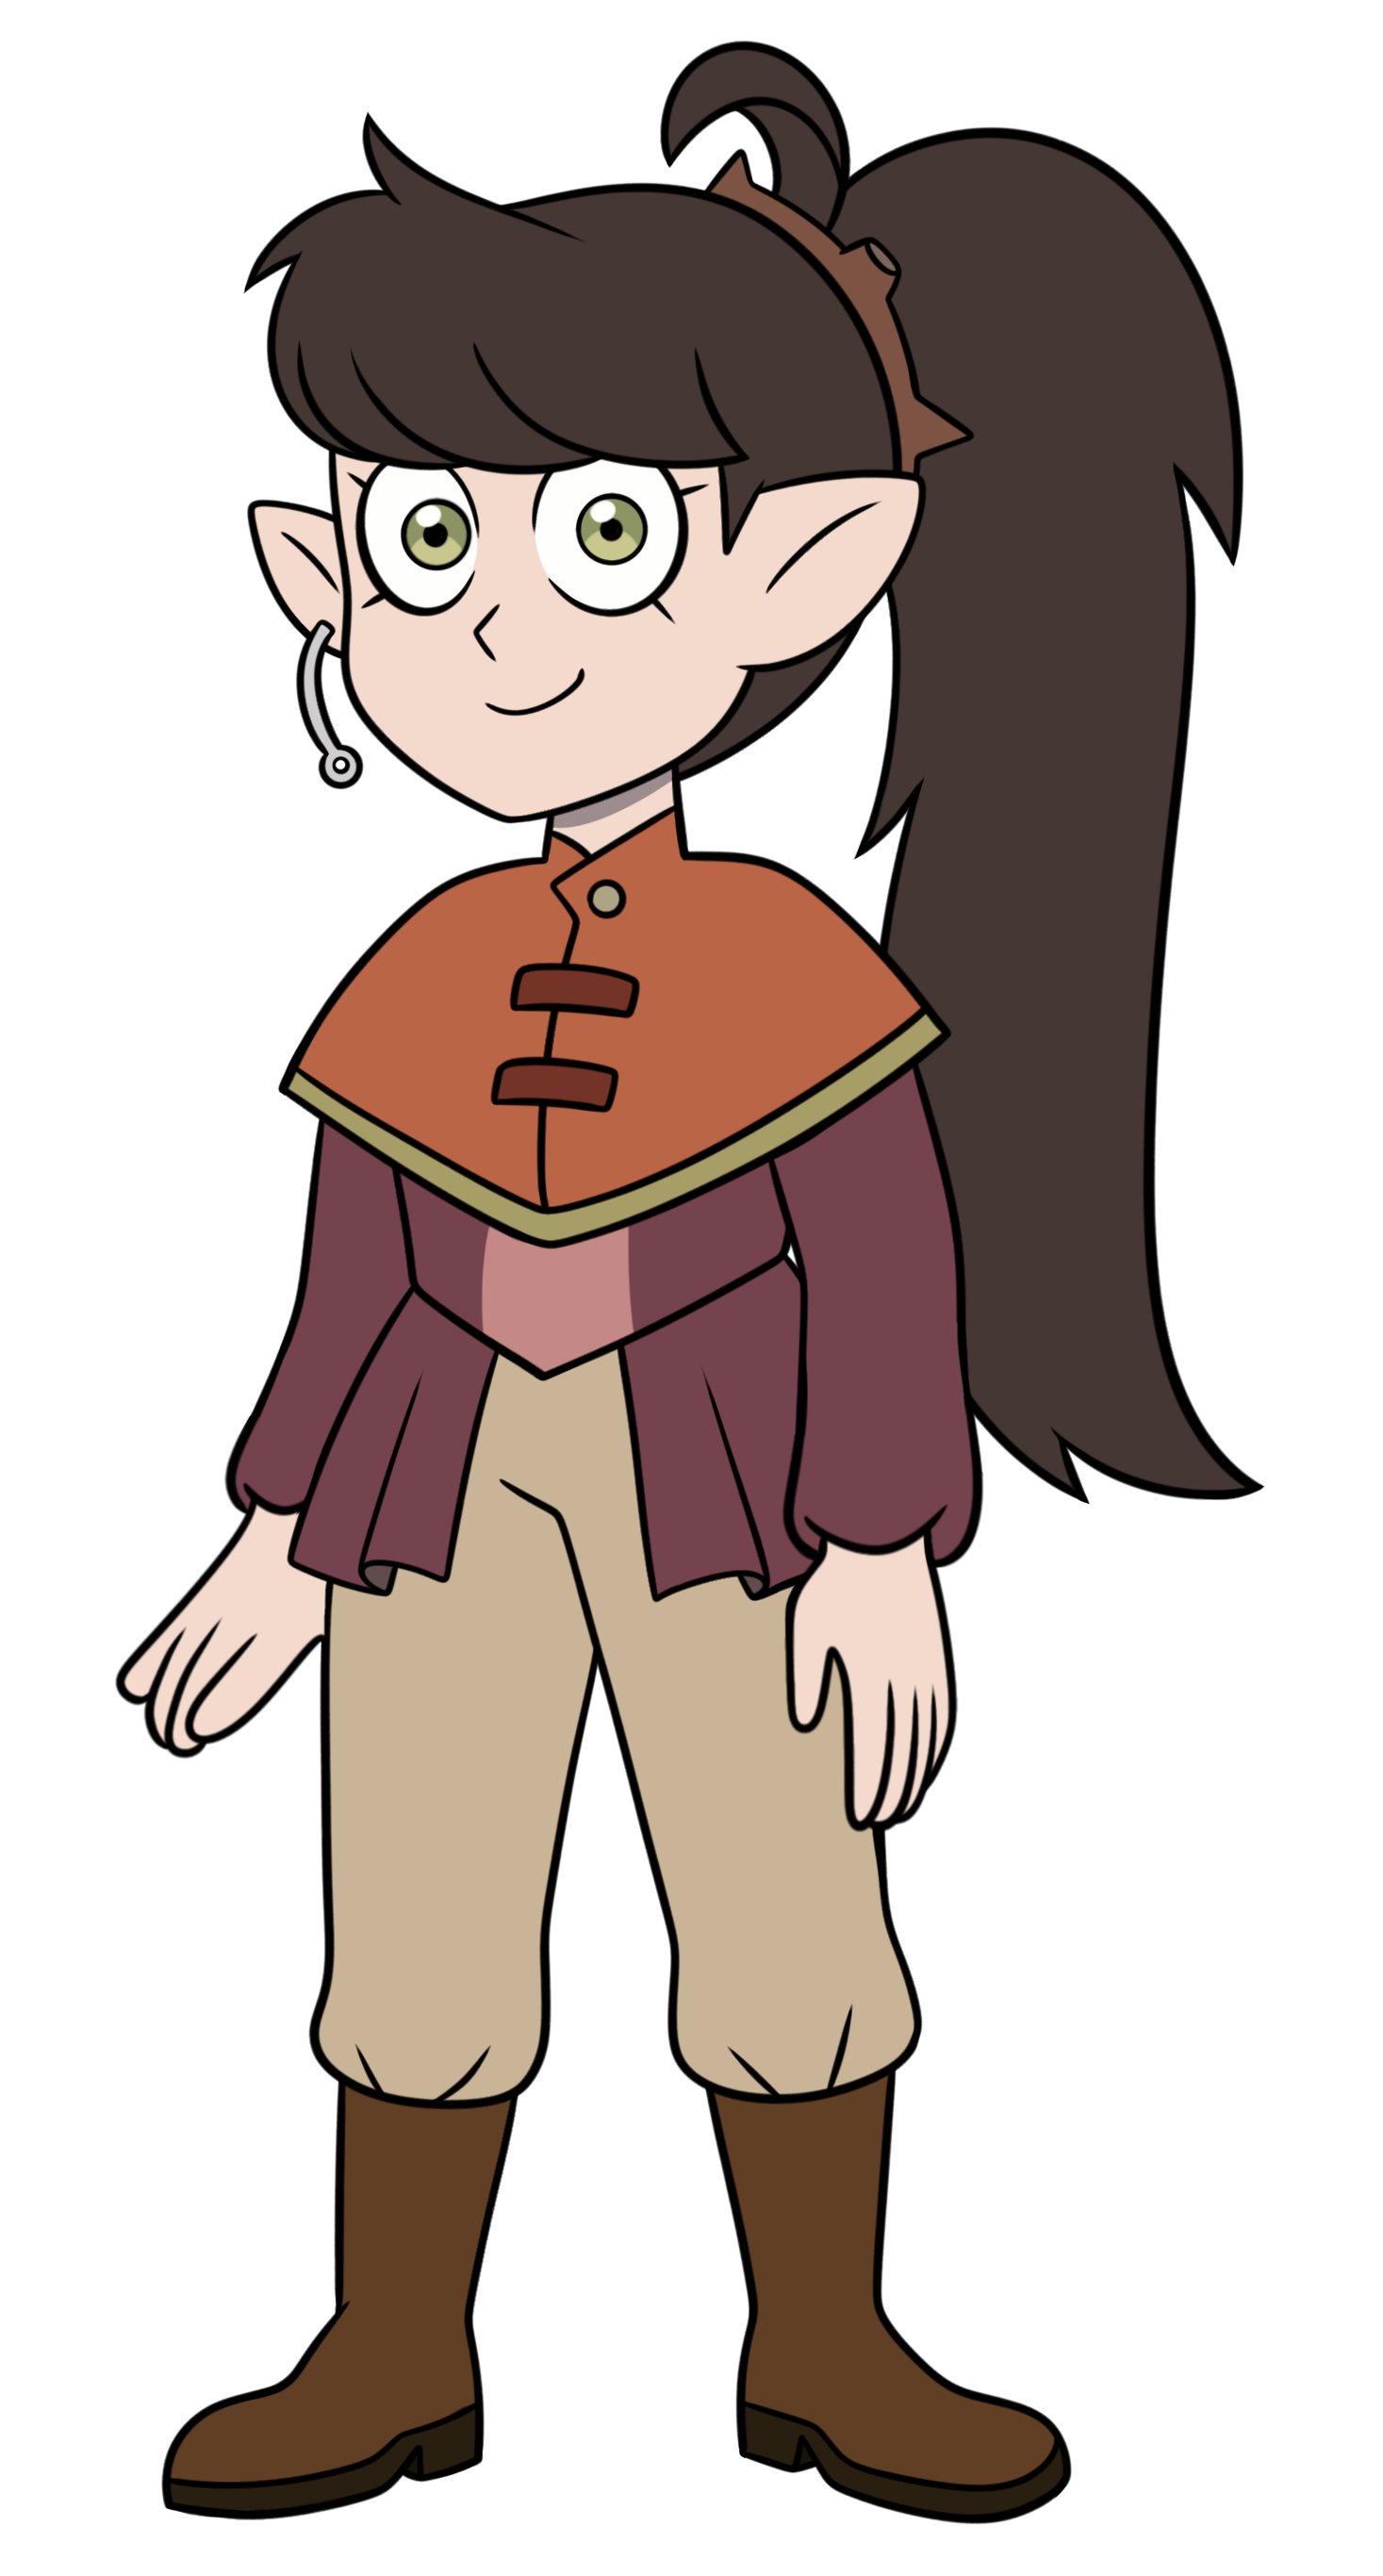 Day 20 of drawing badly until the owl house season 3 : r/TheOwlHouse